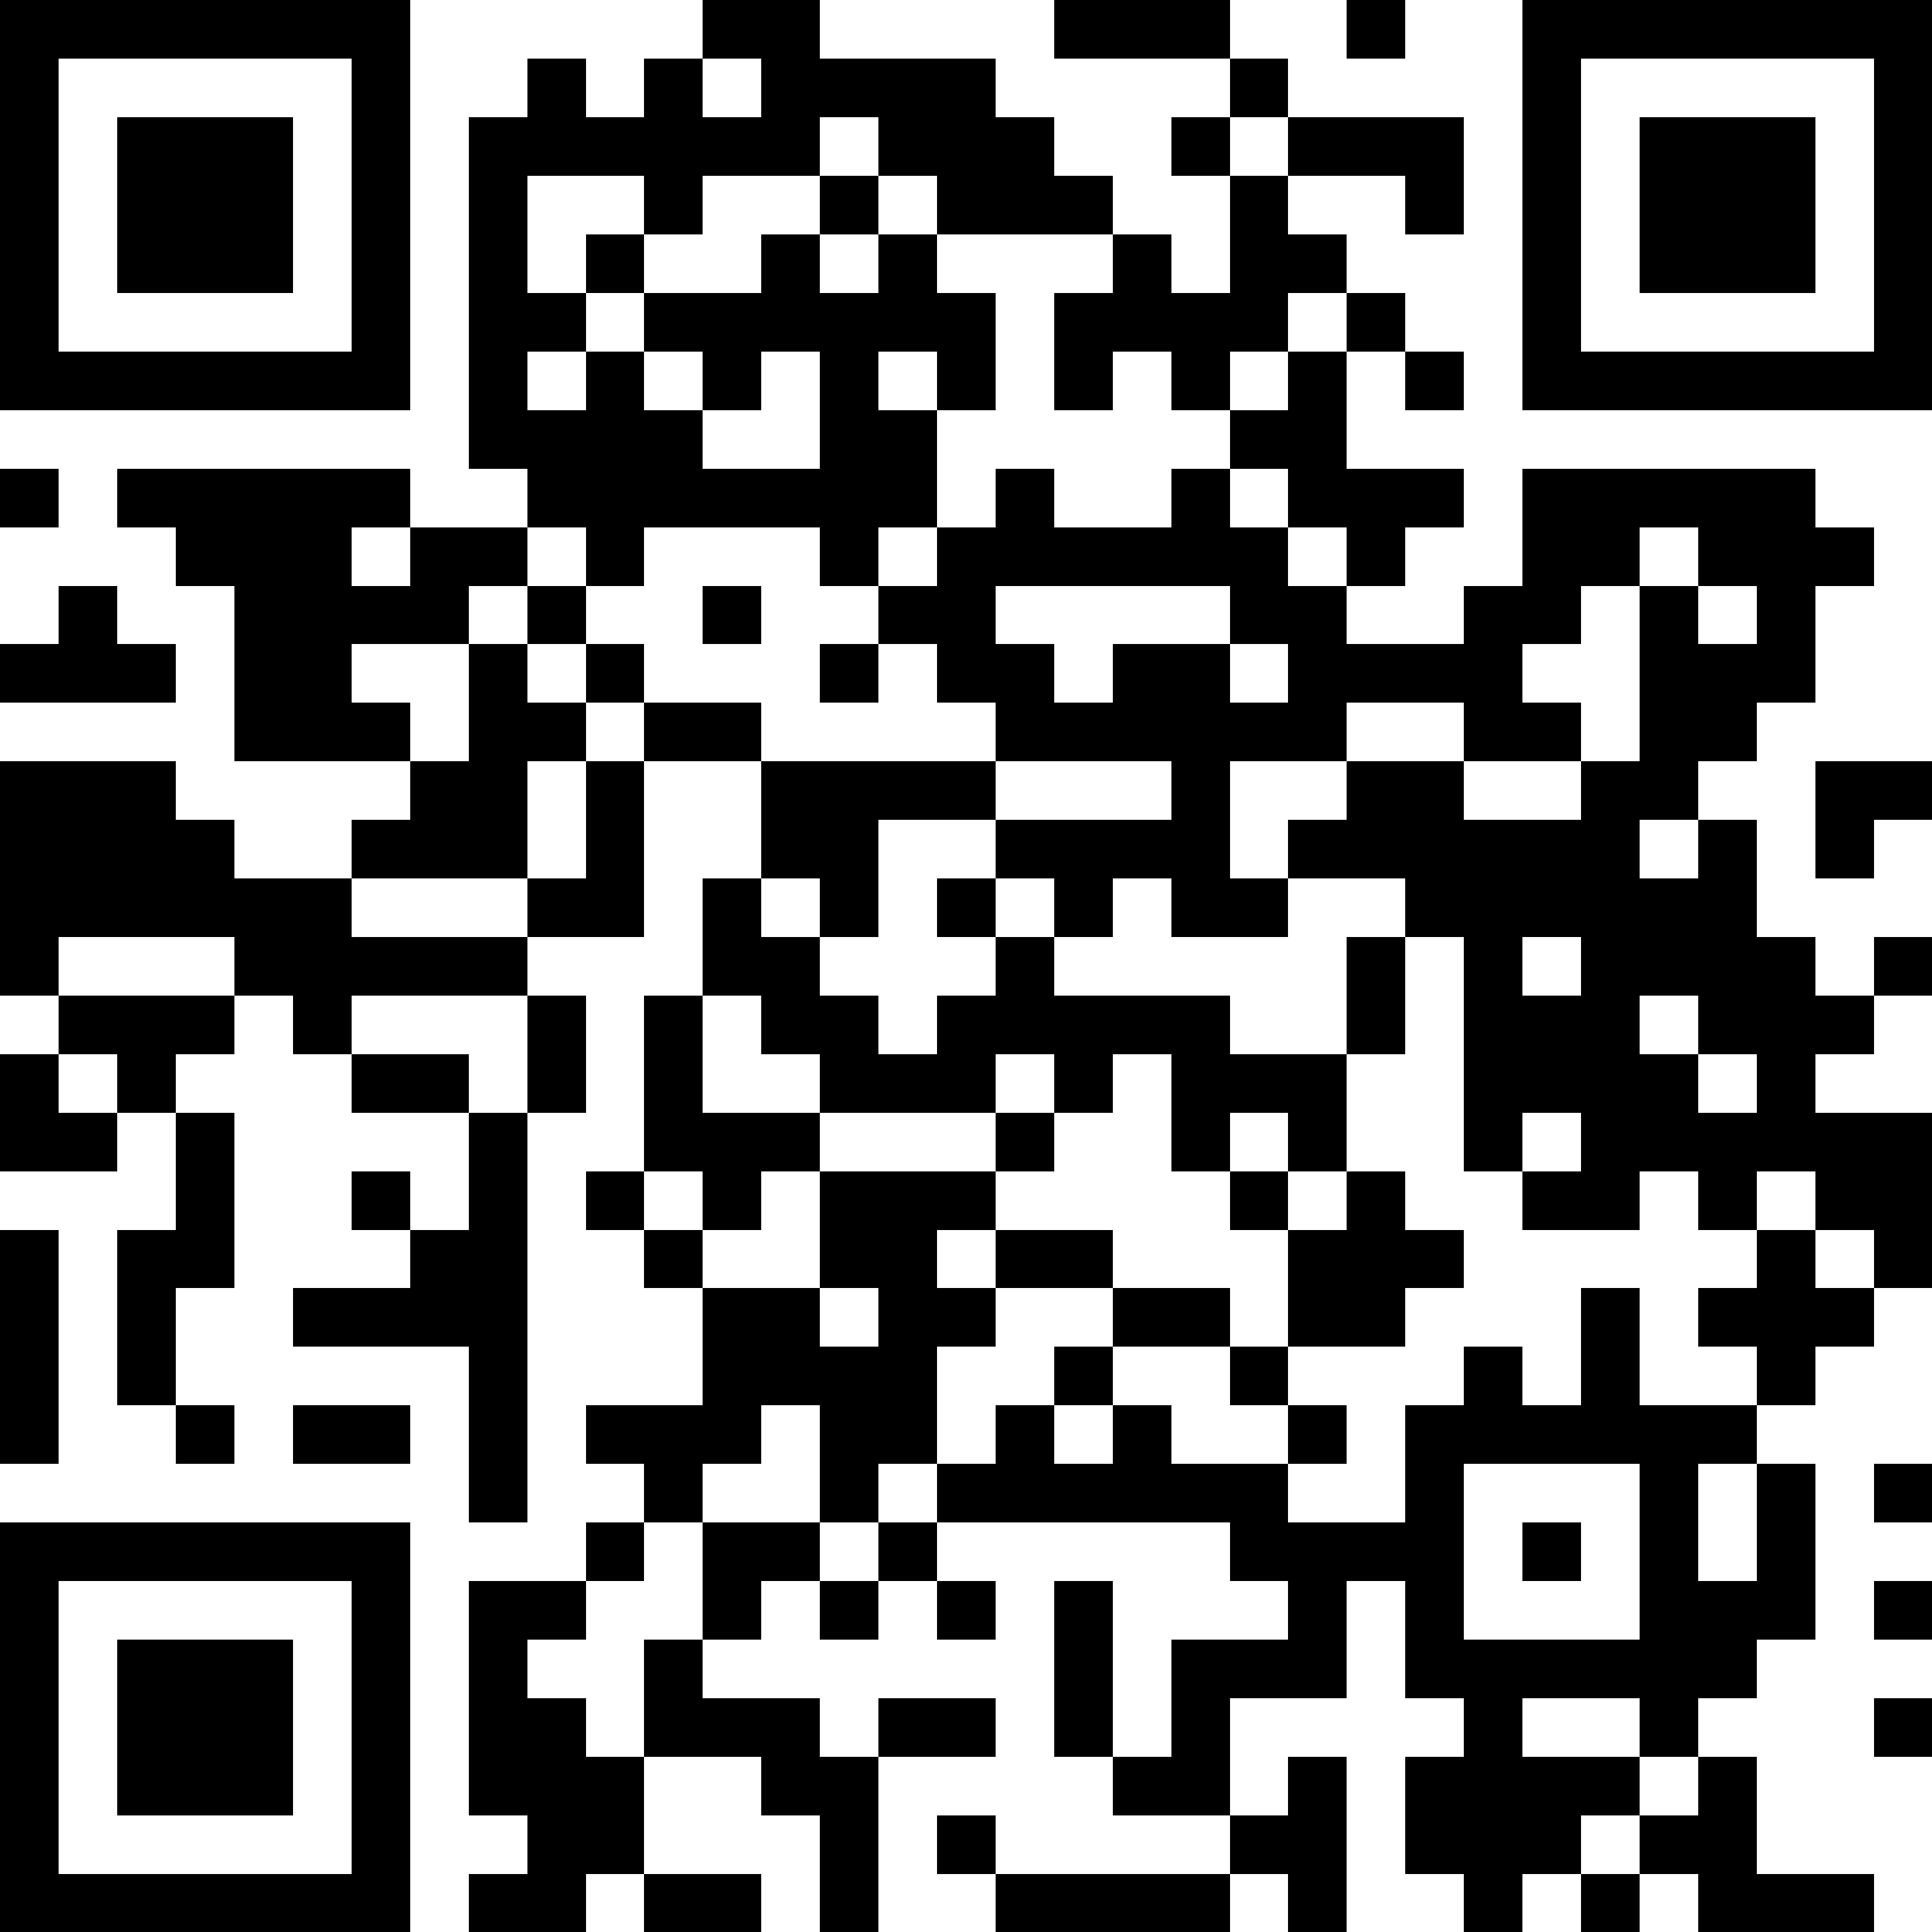 QRcode-here